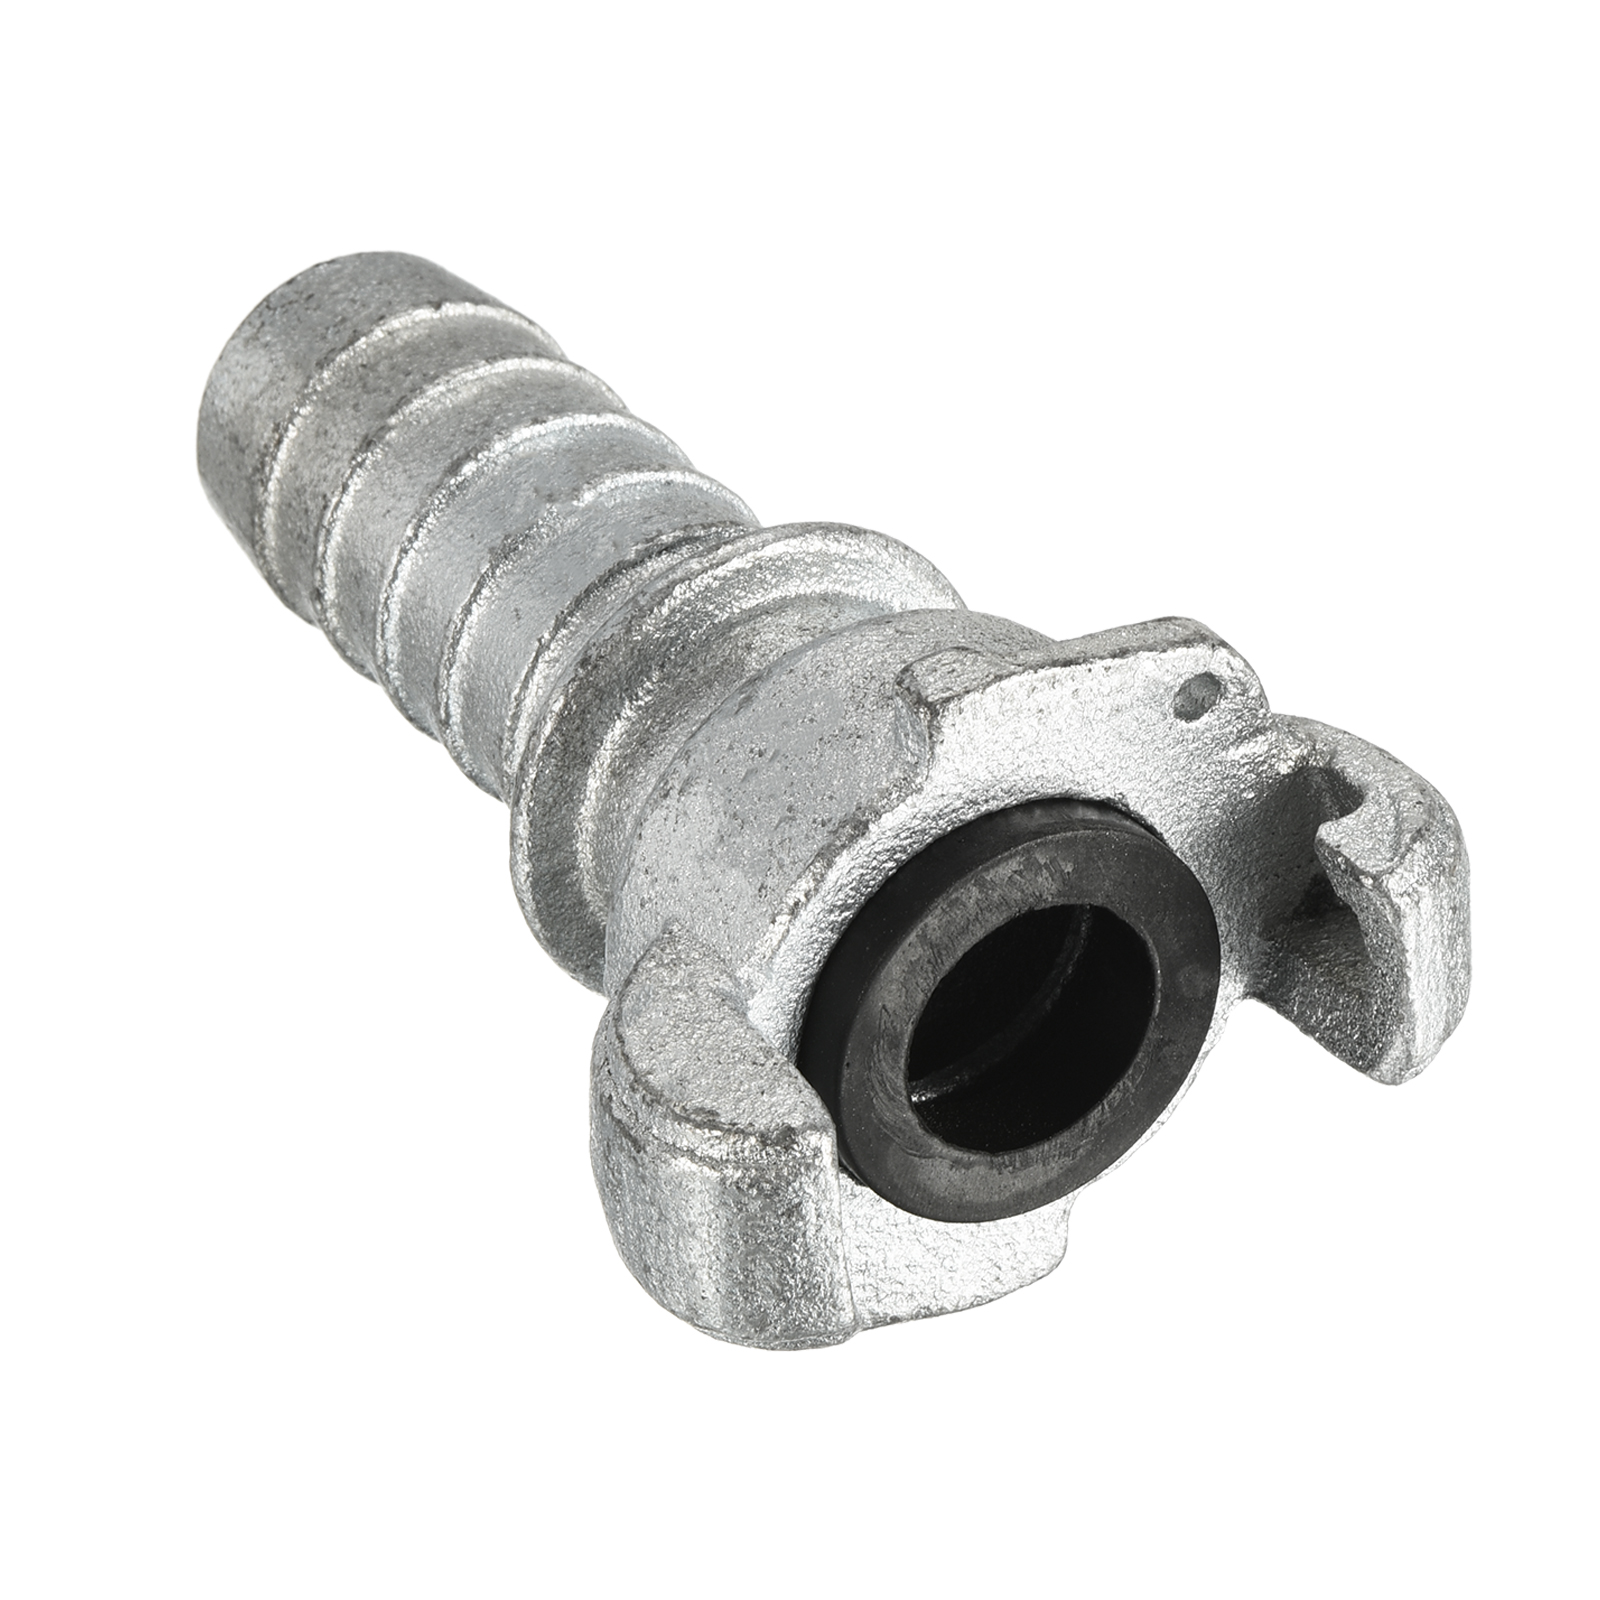 CX, JX, JX2 Airbrush Hose Easy Connector with Barb for Air Hose